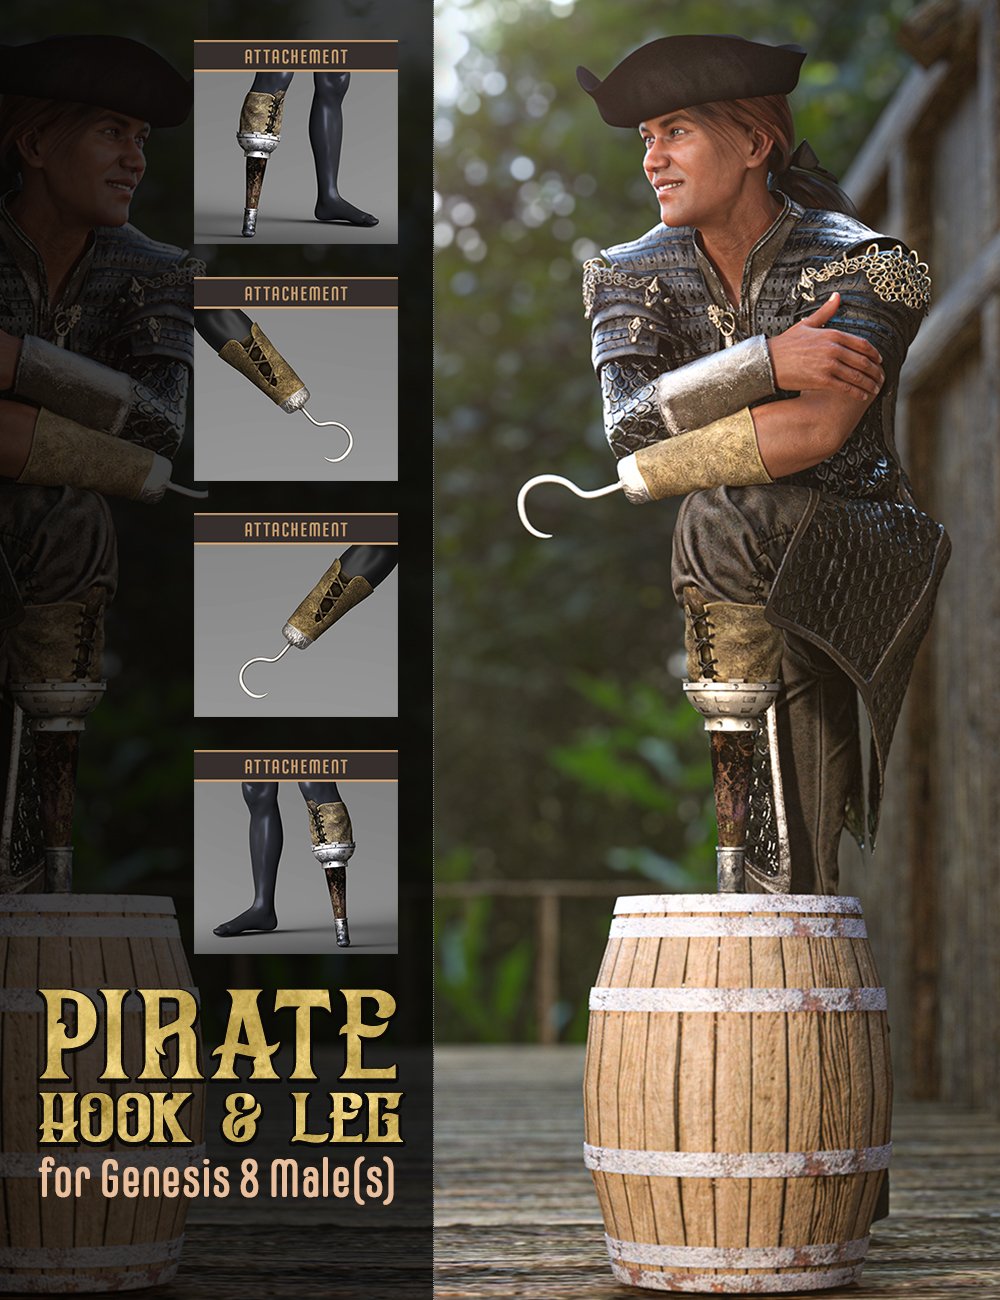 Pirate Hook and Leg for Genesis 8 Male(s)